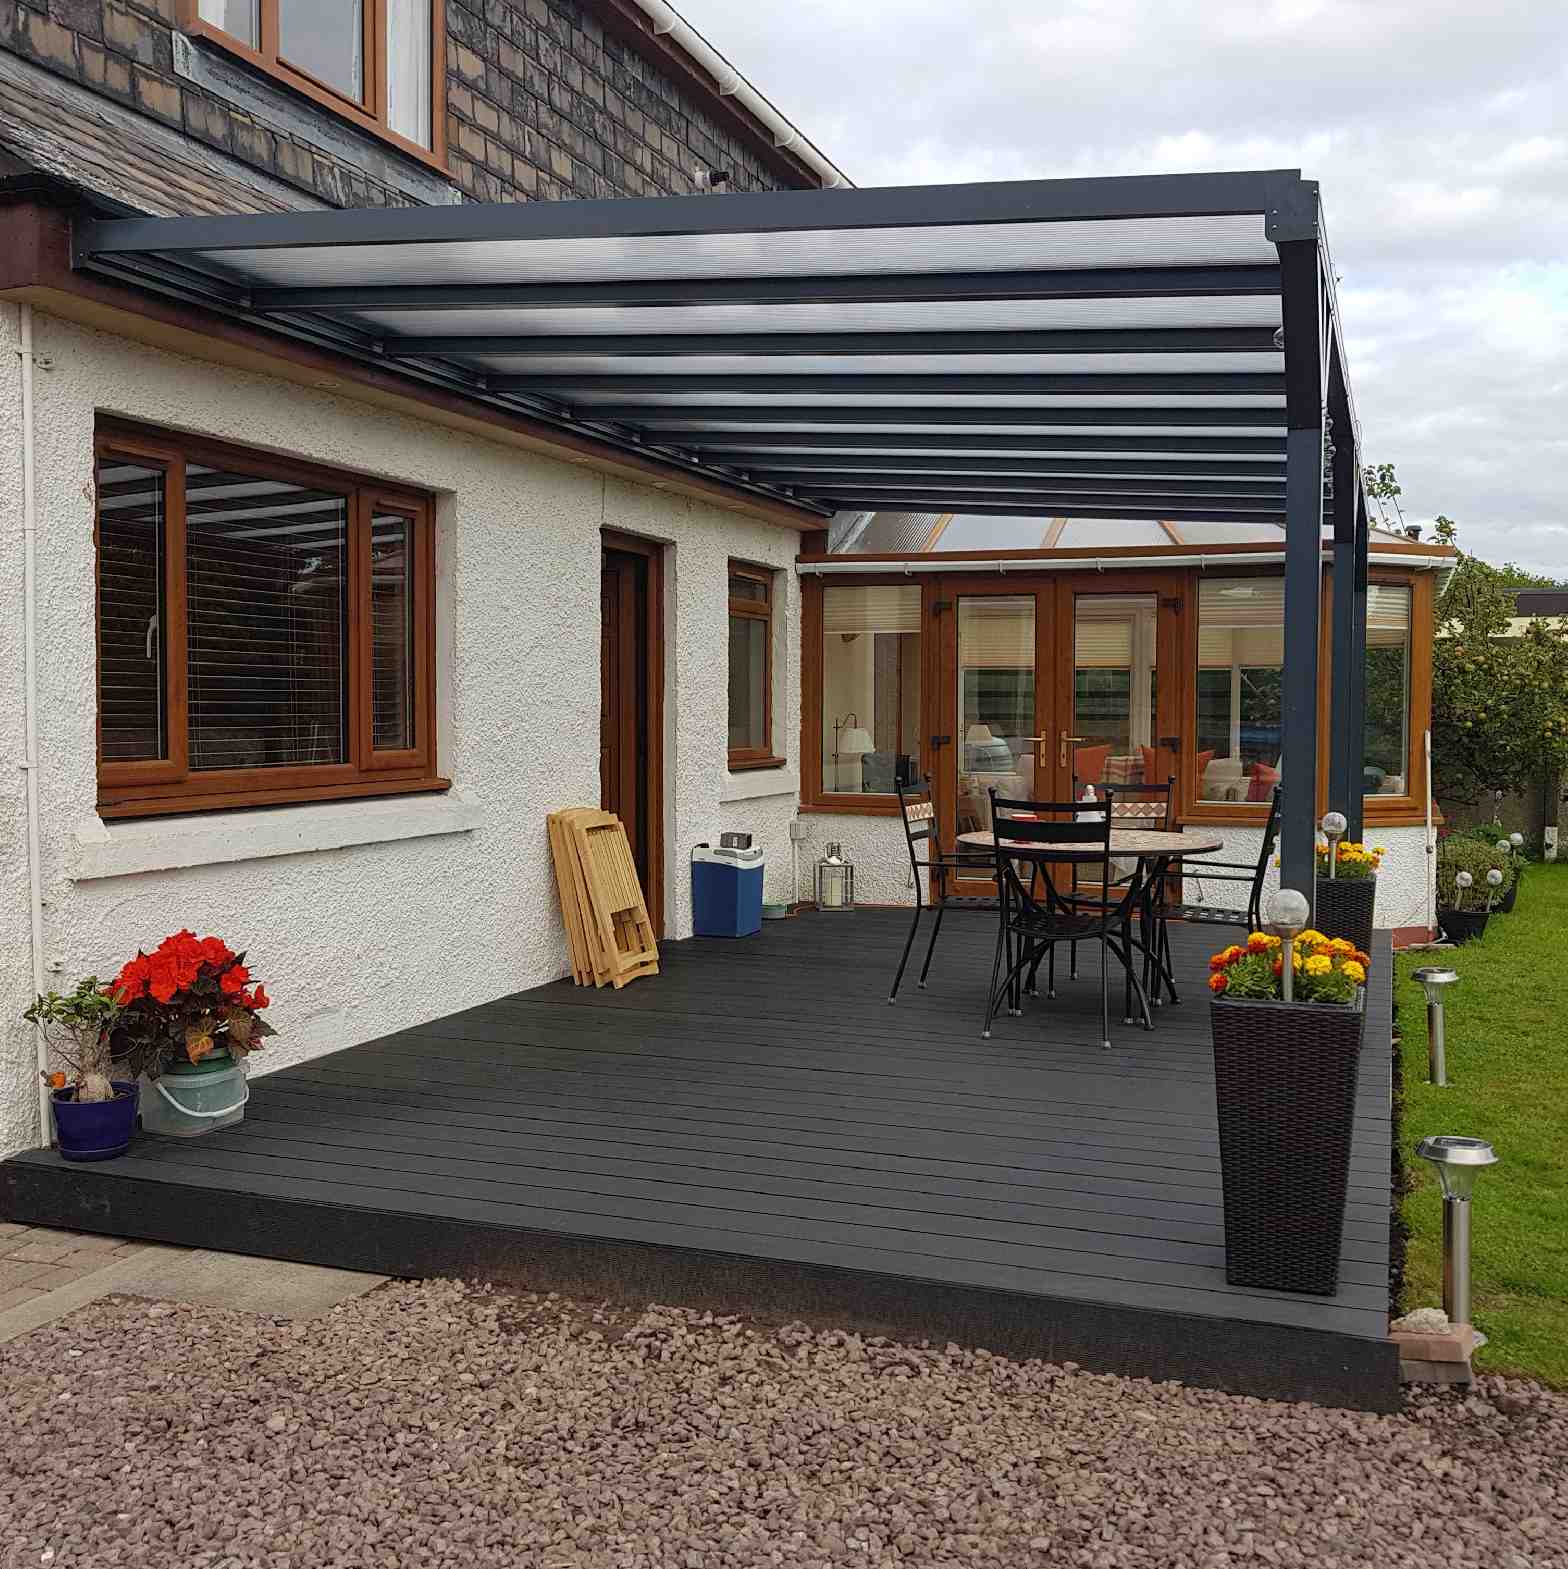 Buy Omega Verandah, Anthracite Grey, 16mm Polycarbonate Glazing - 8.4m (W) x 2.0m (P), (4) Supporting Posts online today